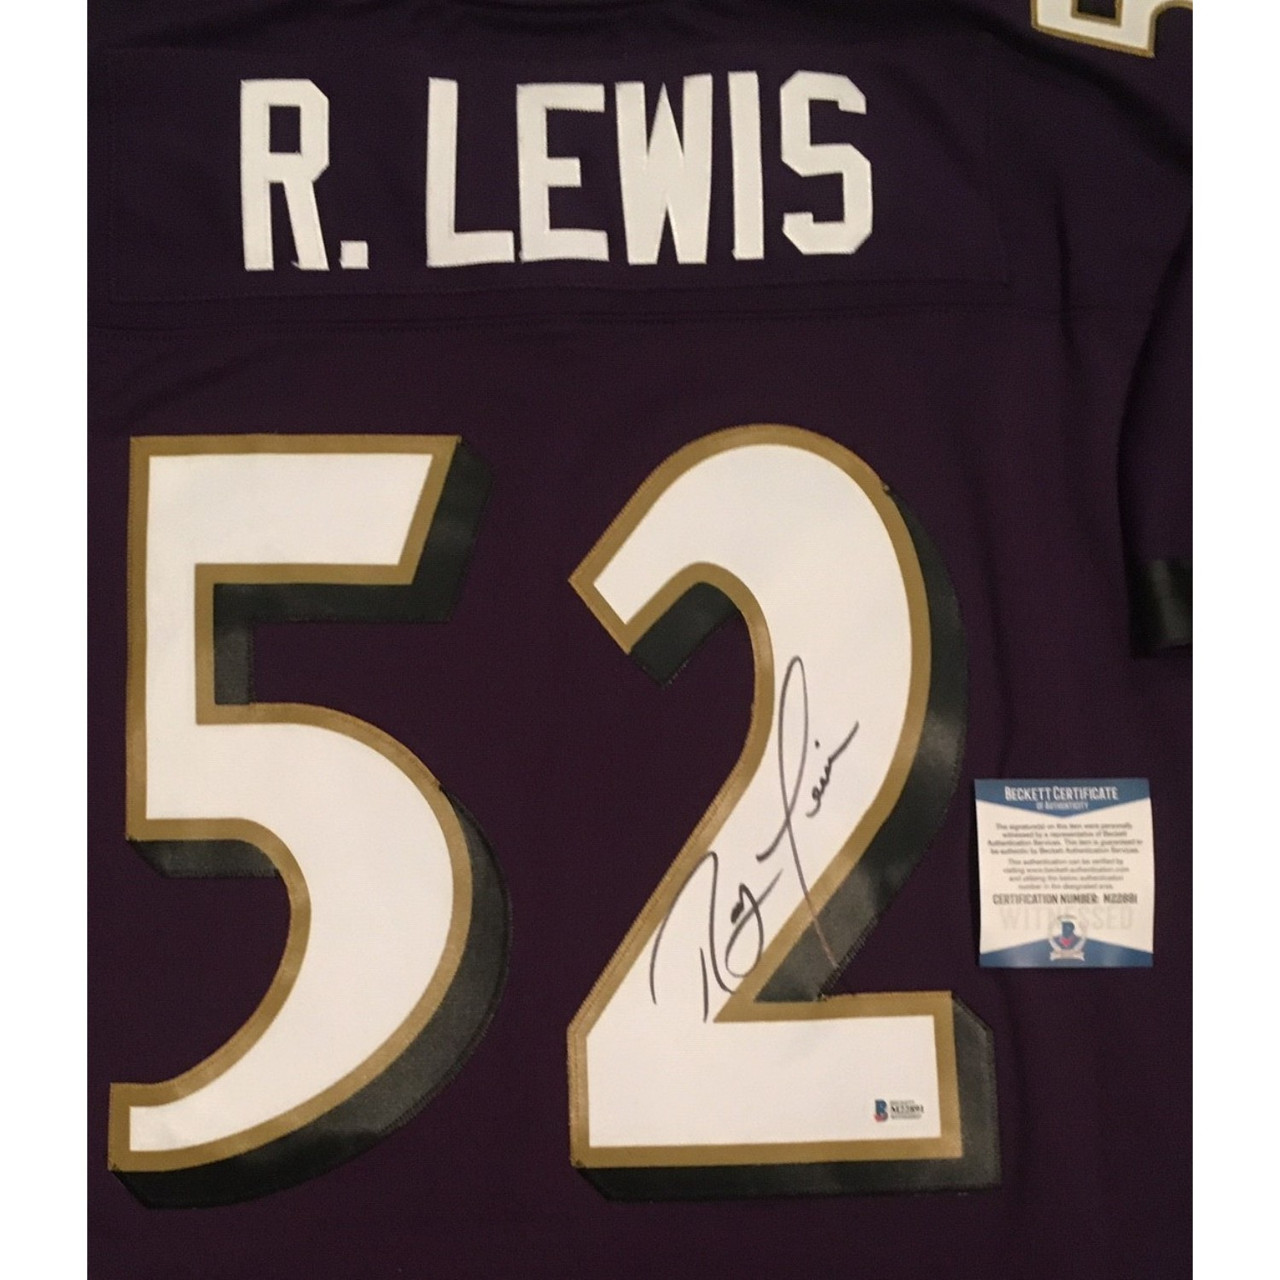 ray lewis autographed jersey authentic